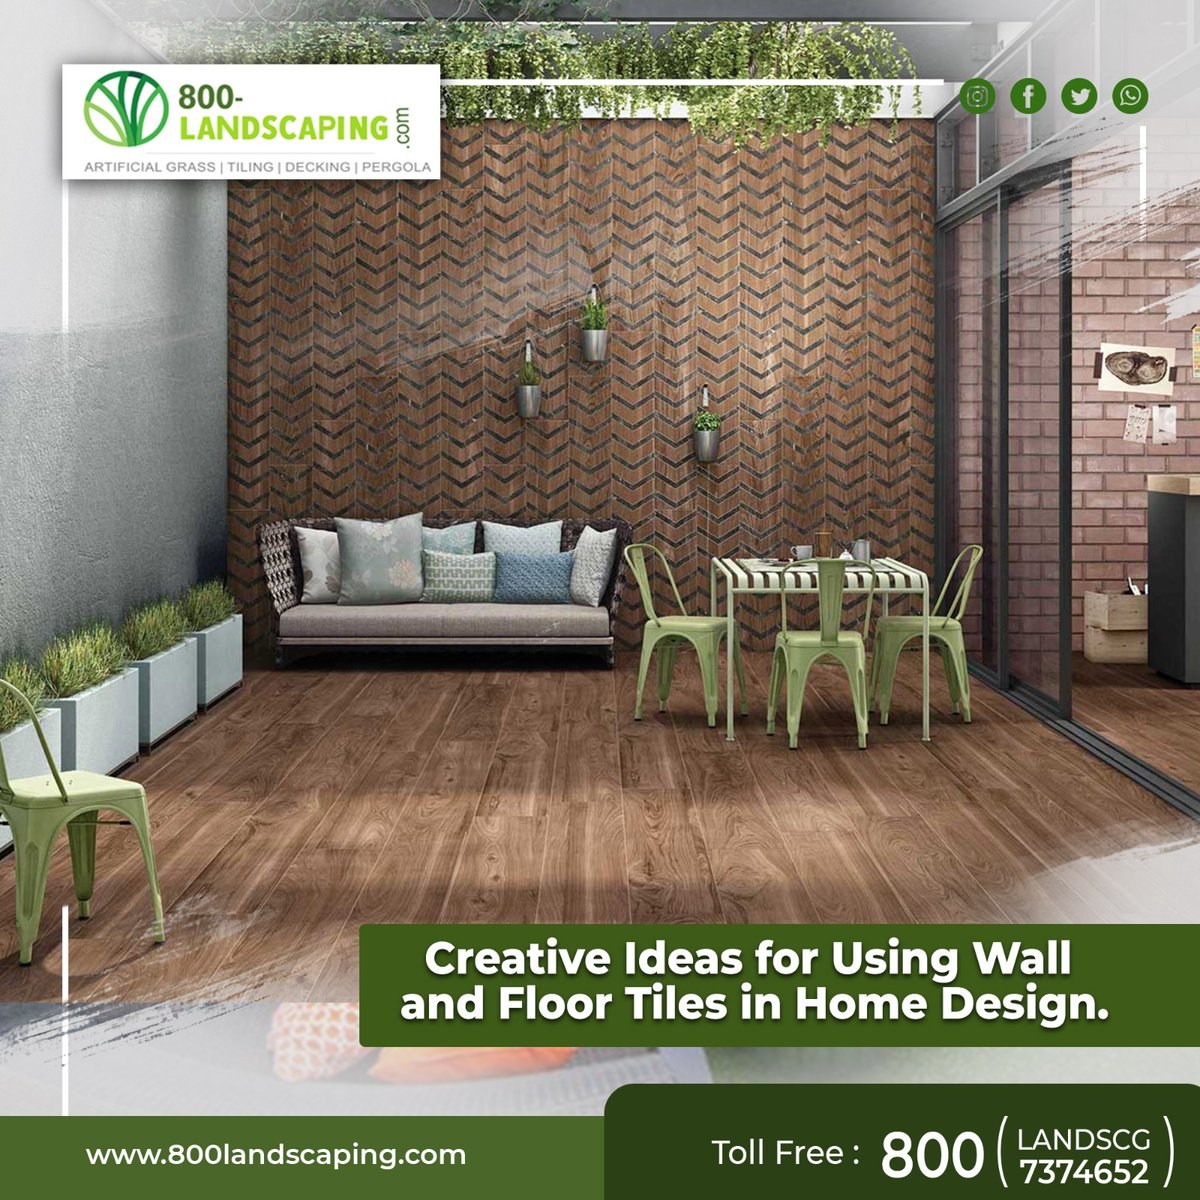 Creative Ideas for Using Wall and Floor Tiles in Home Design🏠
Looking to add a creative touch to your home? Consider using #wallandfloortiles in unique ways!
From mosaic accents to geometric patterns, tiles can elevate the aesthetics.
Call Us Now at 055 380 5148 .
#hardscaping